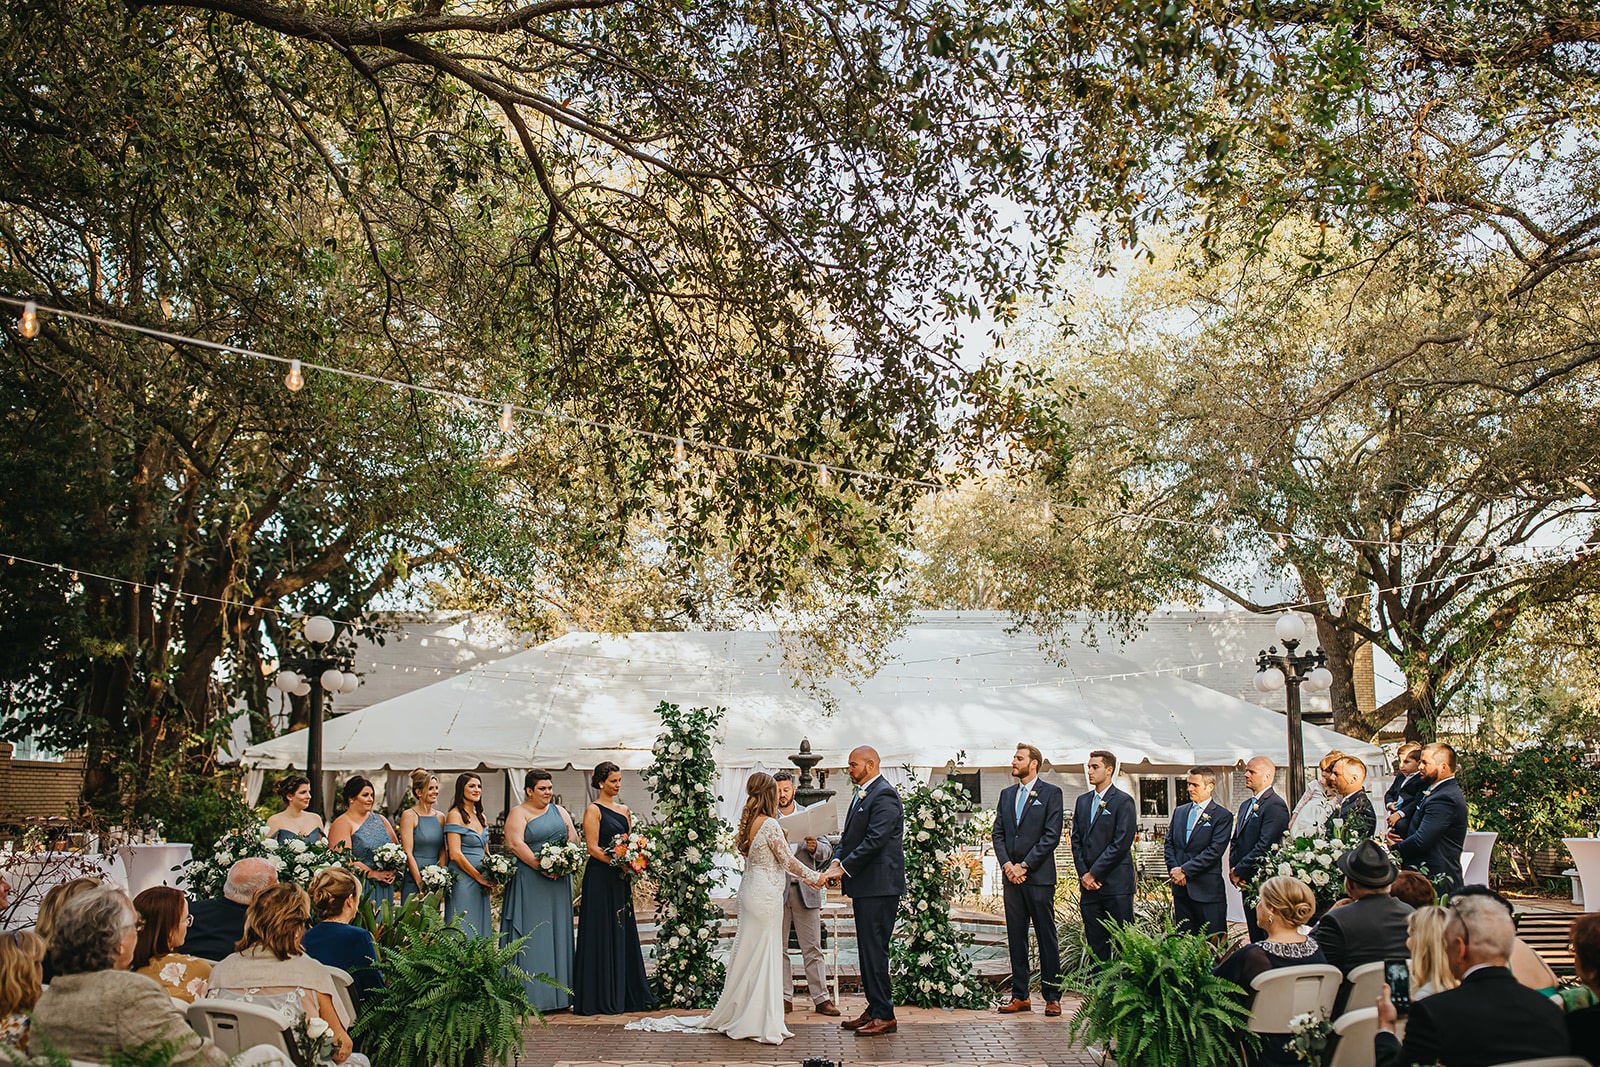 Bride and Groom Exchanging Vows during Ybor City Tampa Outdoor Historic Museum Garden Wedding Ceremony with Fountain Backdrop | Wedding Floral Arrangements with Classic White Roses and Lisianthus and Natural Greenery by Tampa Wedding Florist Monarch Weddings and Events | Dusty Blue Steel Grey Bridesmaid Dresses and Navy Blue Groomsmen Suits